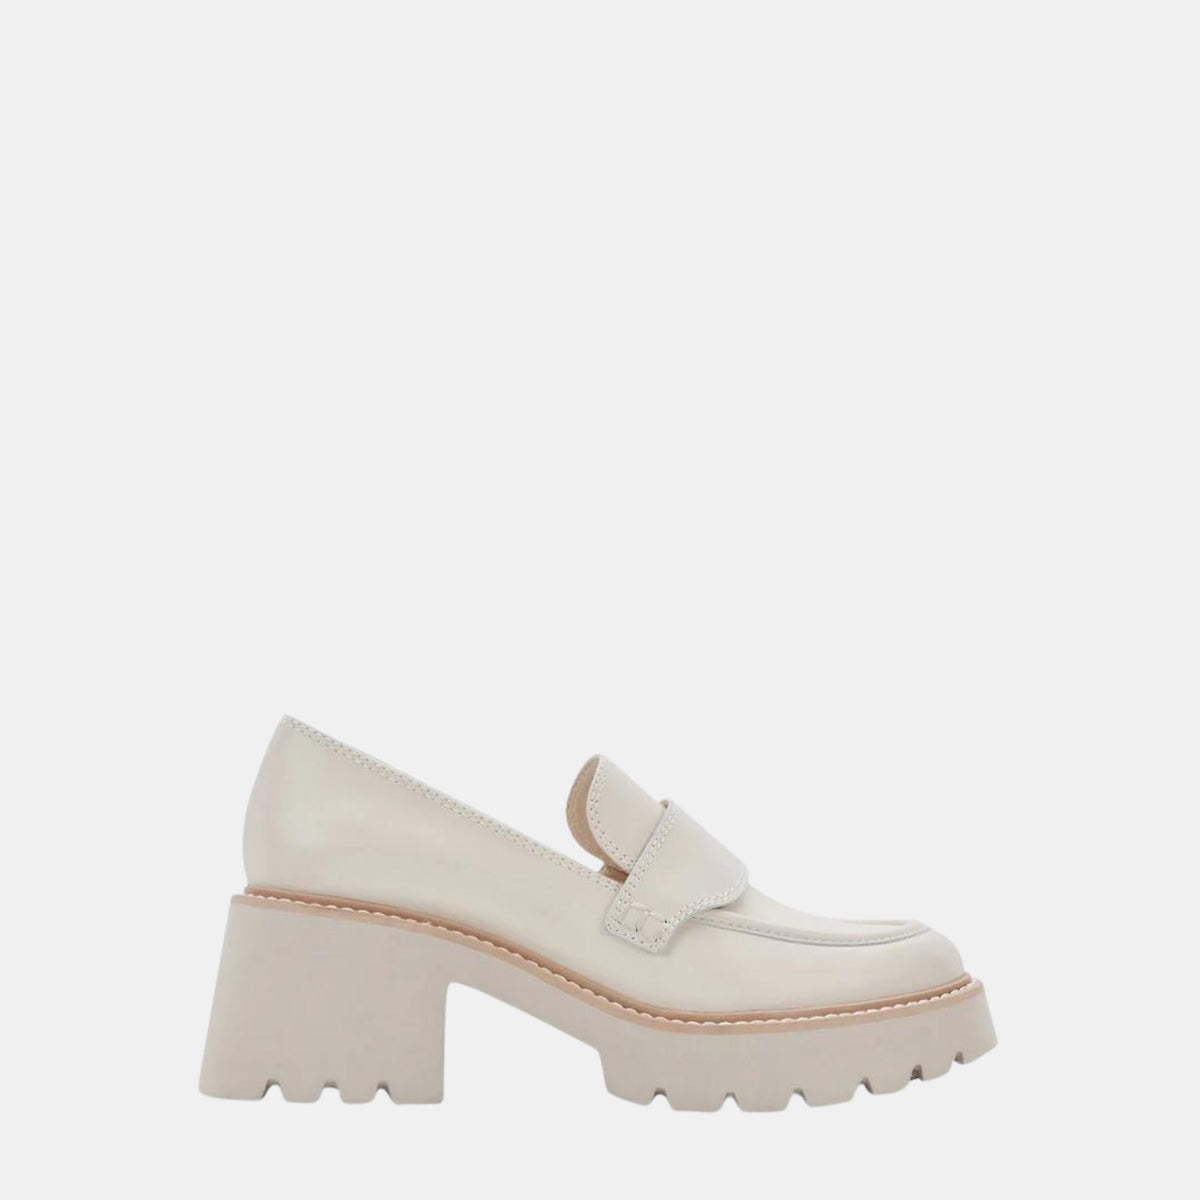 Dolce Vita Halona Loafers in Ivory Leather